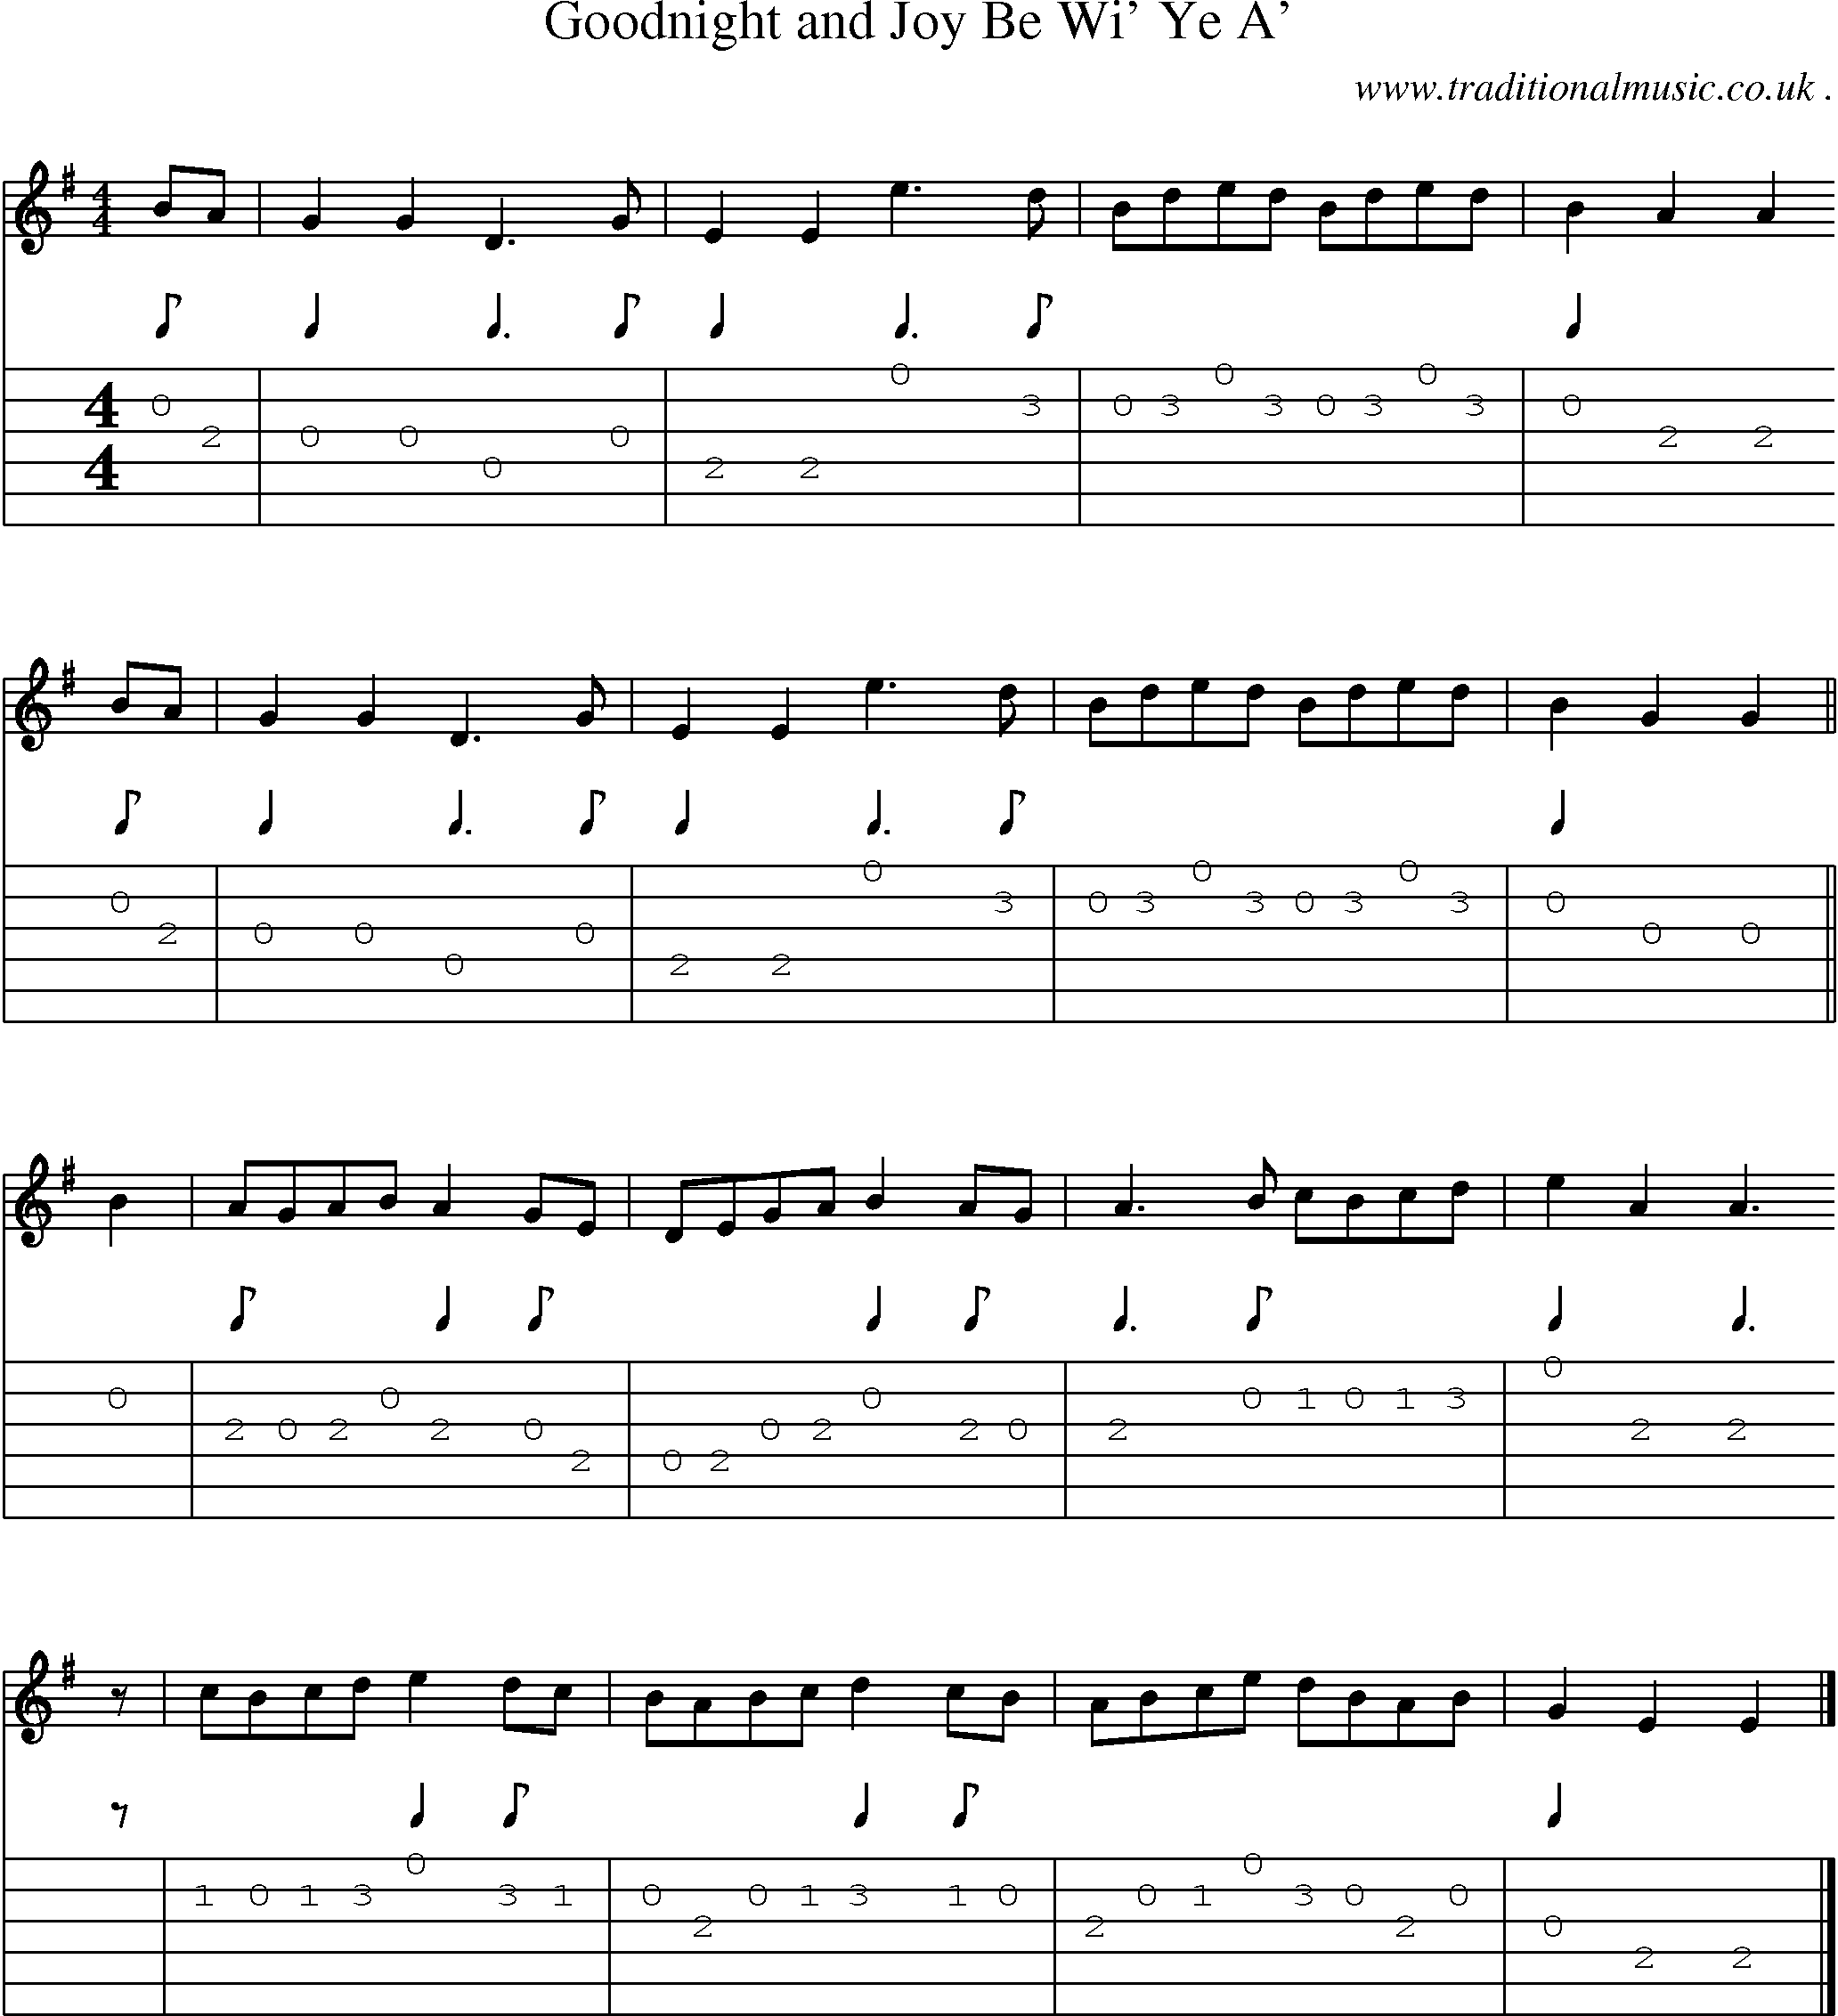 Sheet-music  score, Chords and Guitar Tabs for Goodnight And Joy Be Wi Ye A